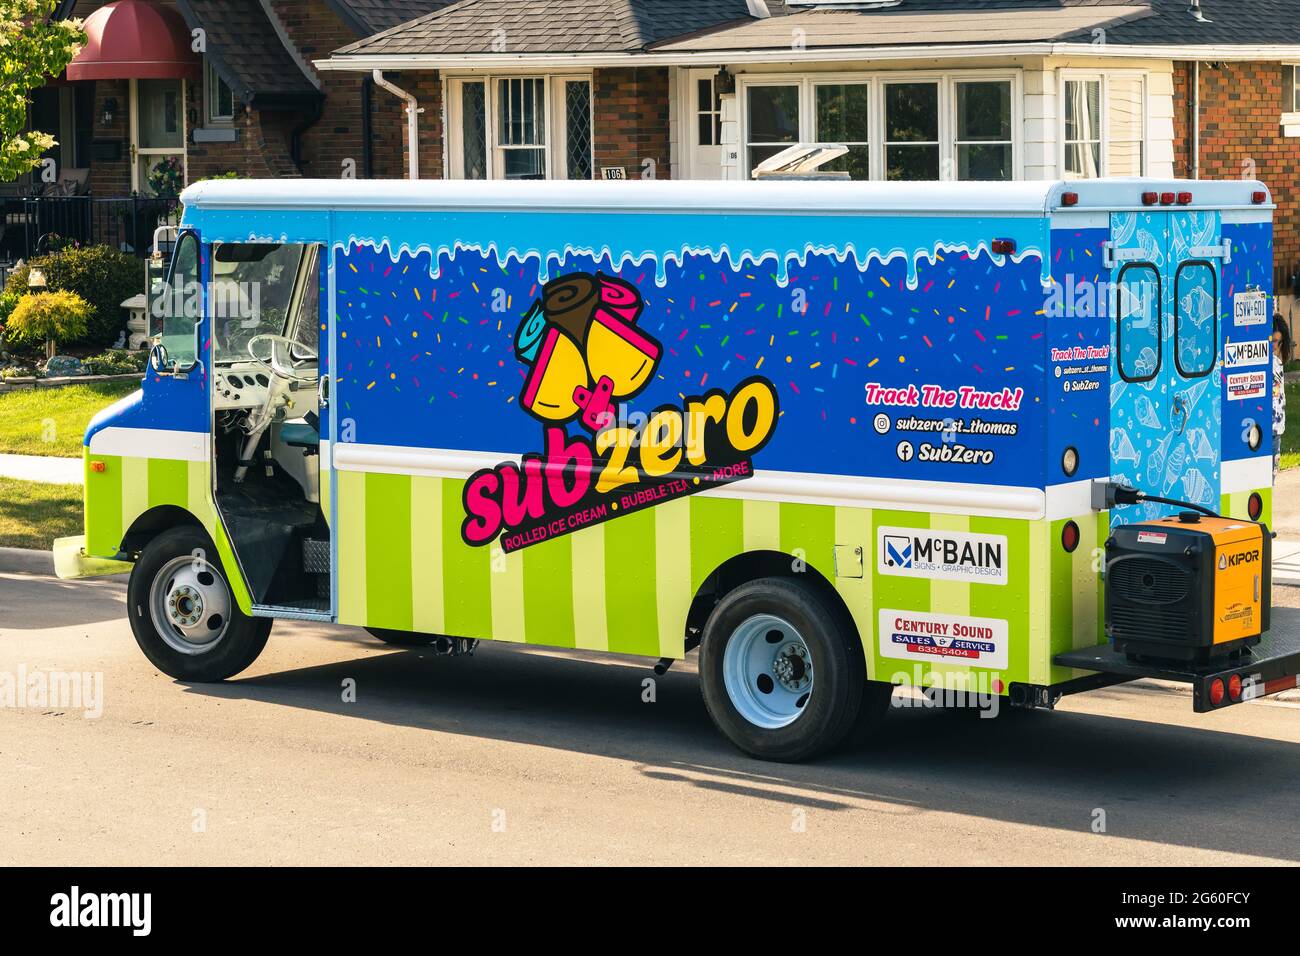 St. Thomas, Ontario, Canada - June 16 2021: A SubZero ice cream truck outside of residential homes, selling ice cream. Stock Photo